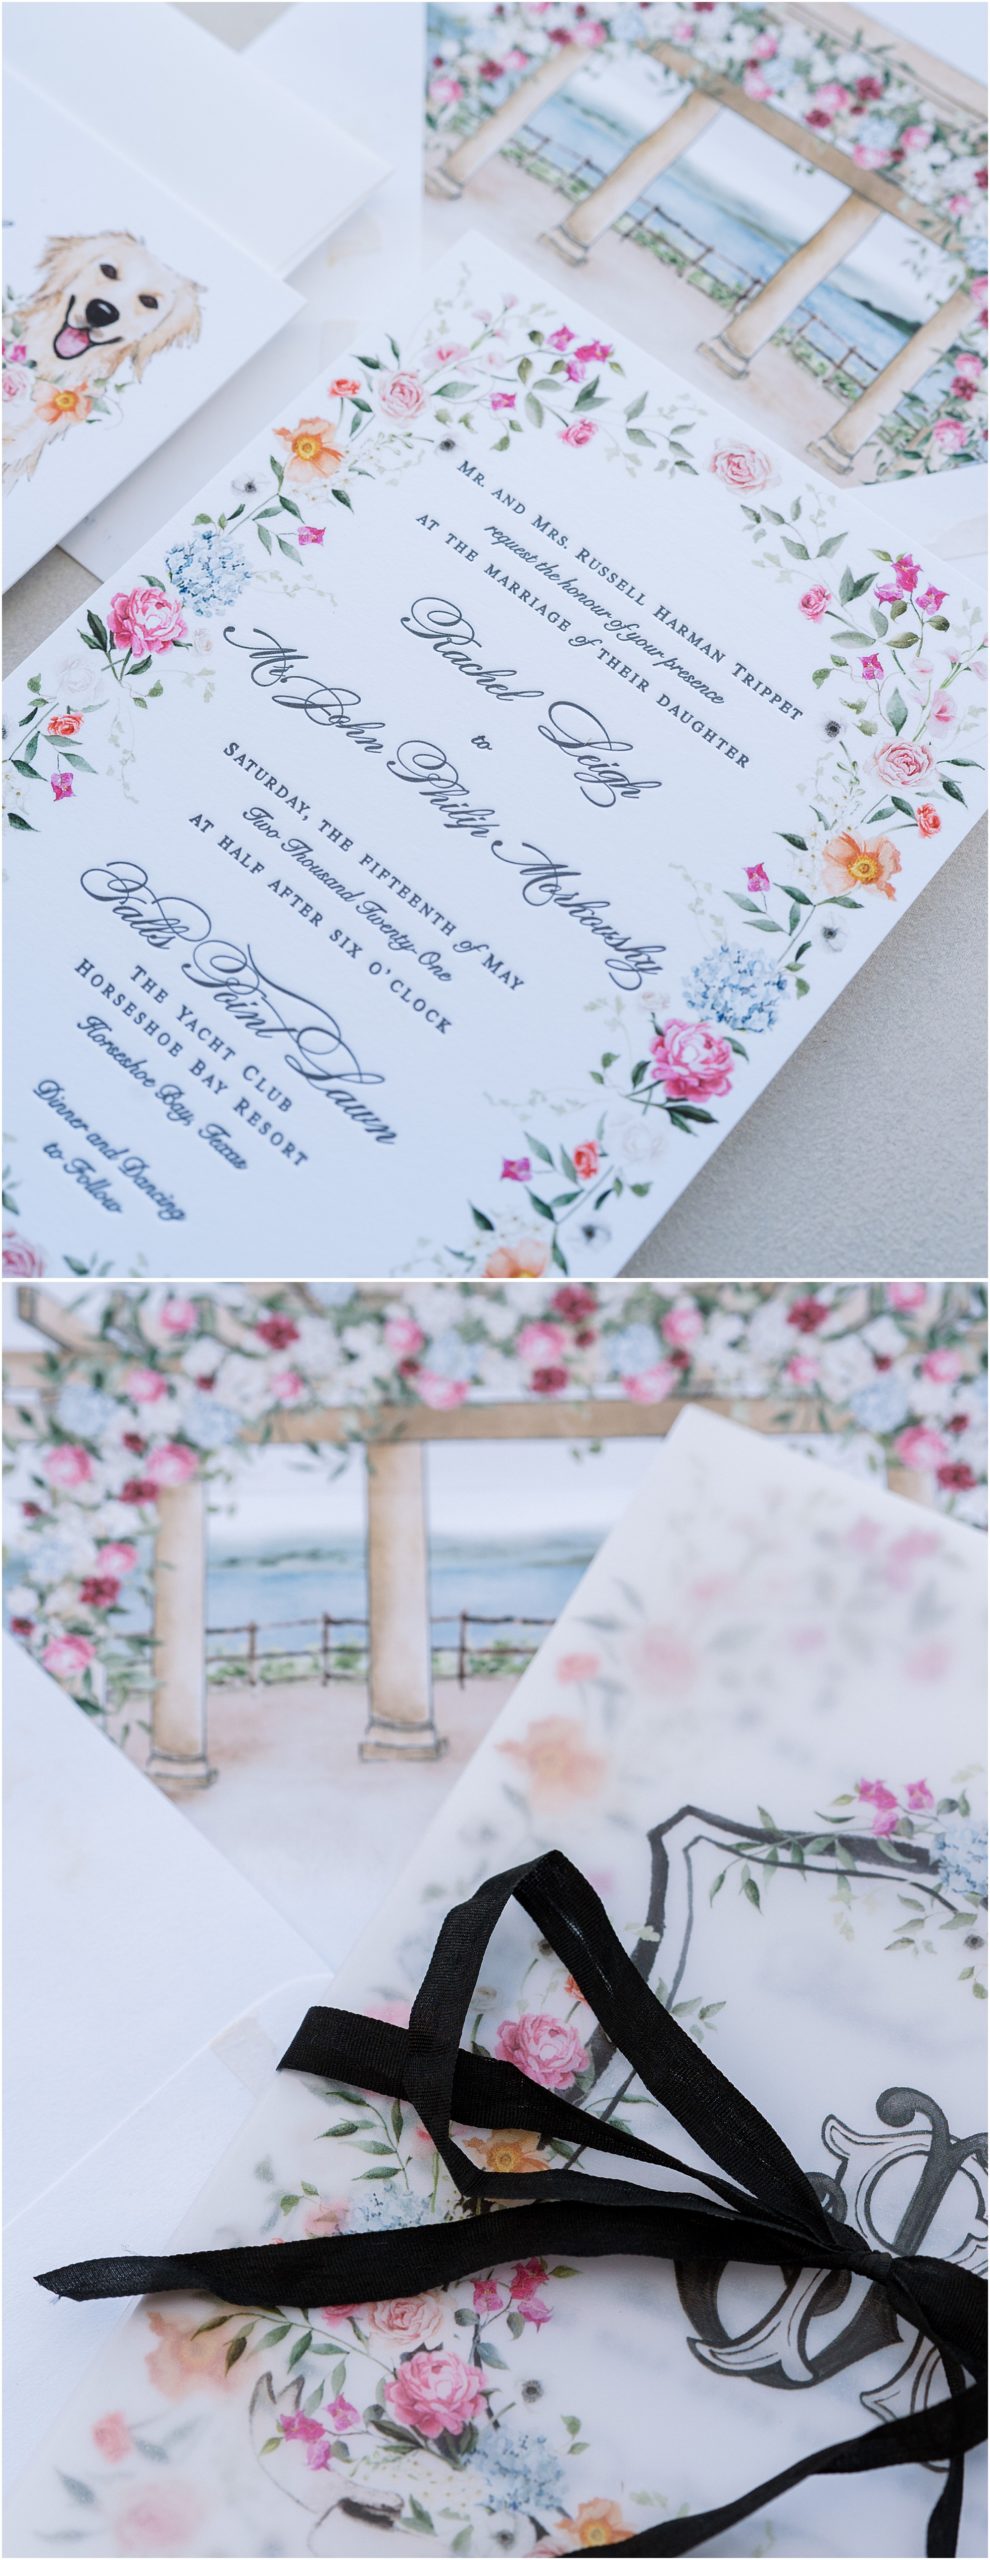 wedding invitations with color flowers and a black bow.